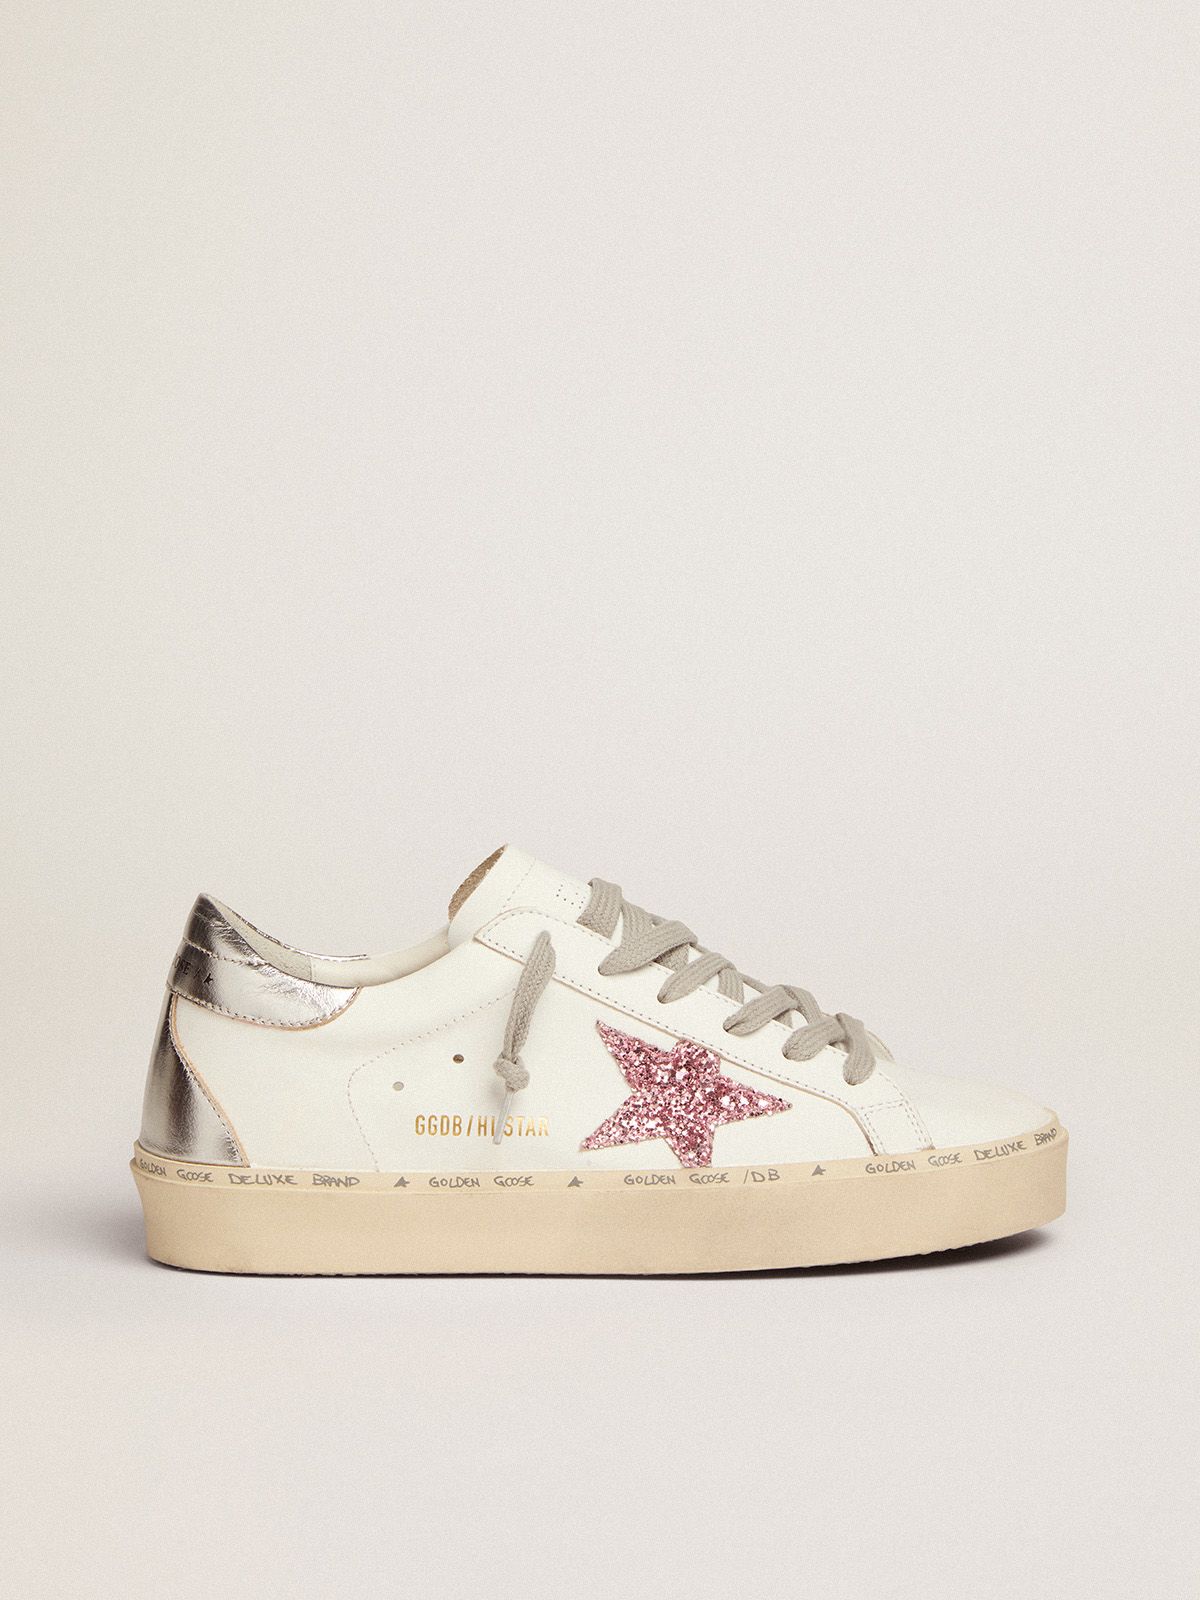 Hi Star Sneakers With Silver Laminated Leather Heel Tab And Pink Glitter Star Golden Goose